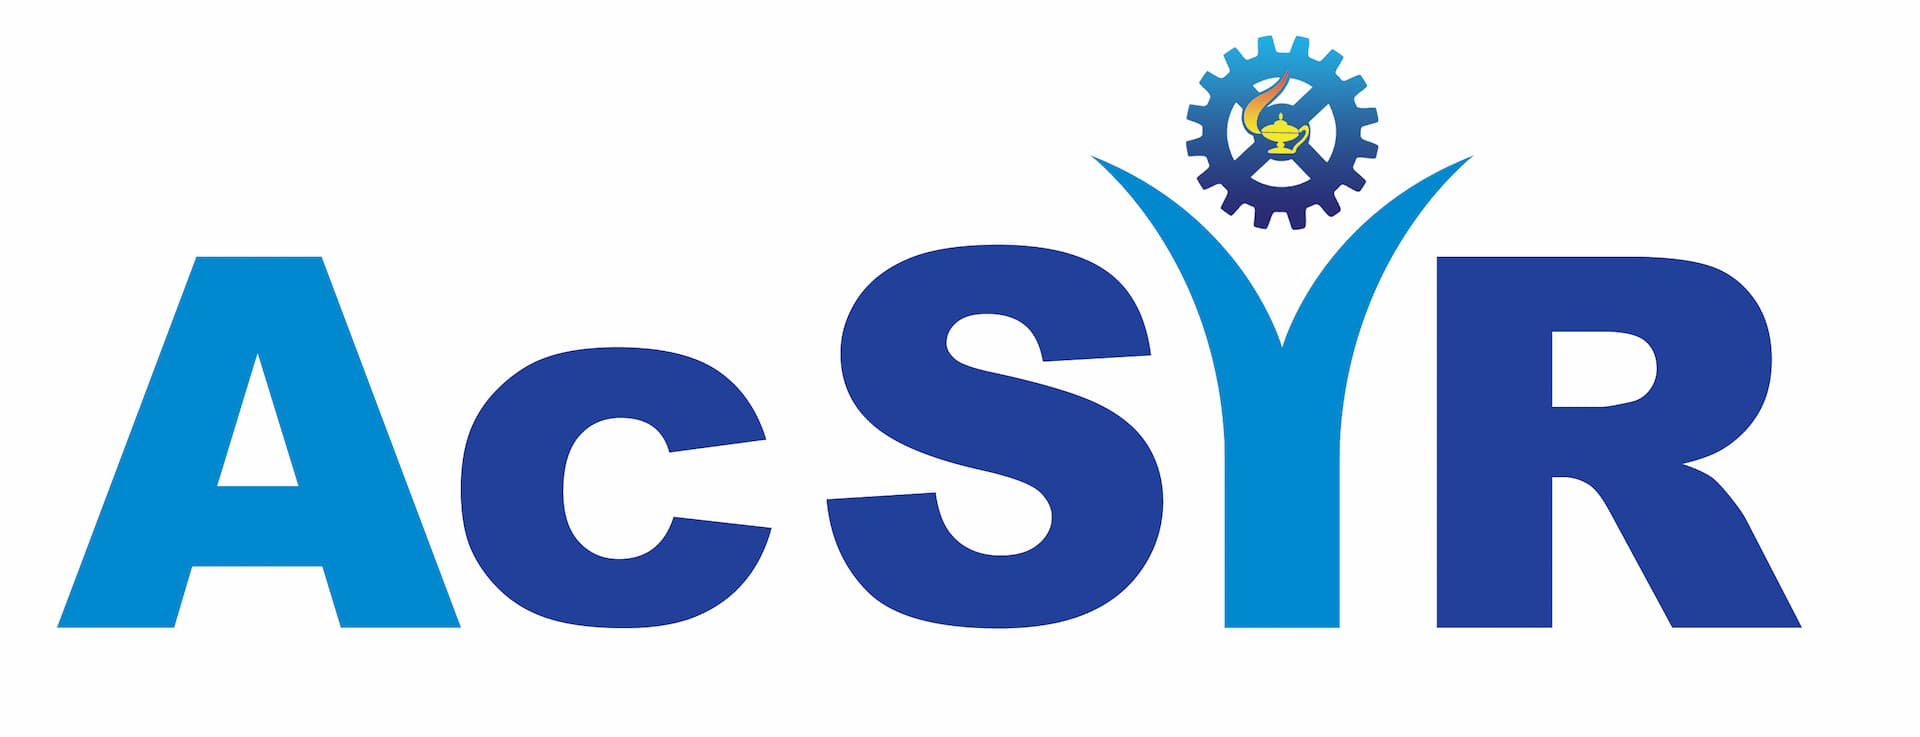 Academy of Scientific and Innovative Research (AcSIR) logo